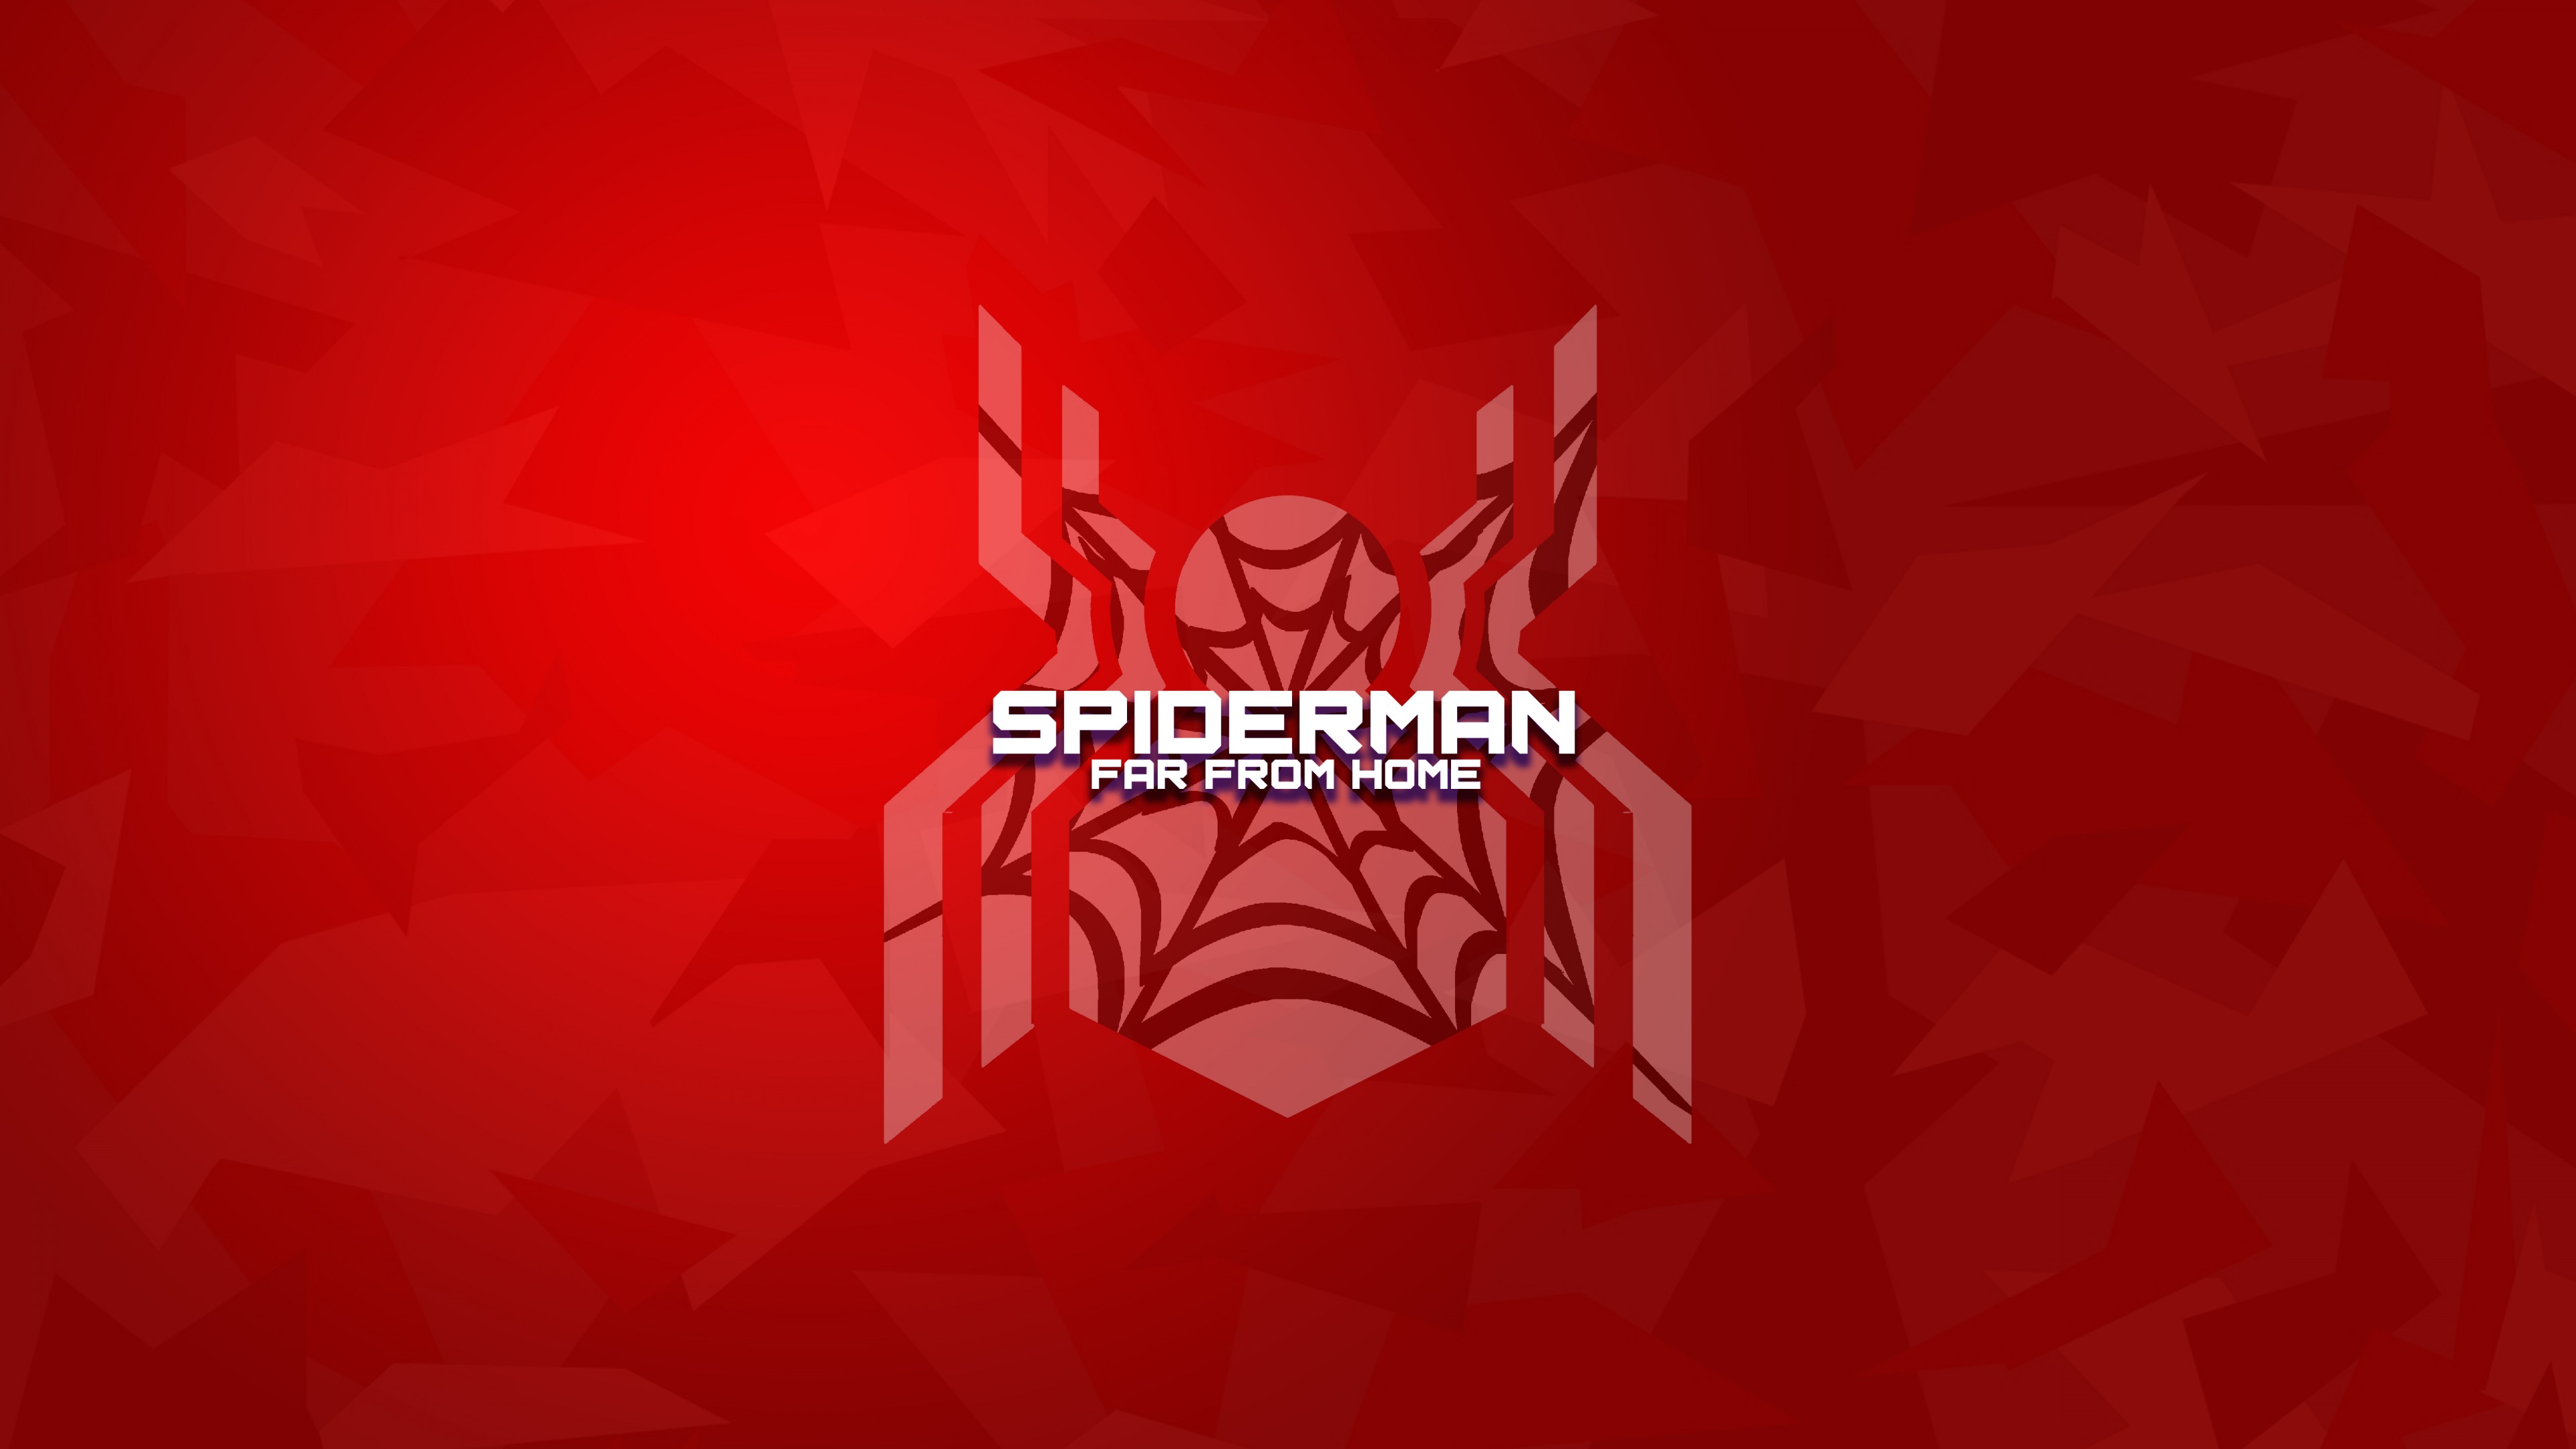 Spider-Man Far From Home 5K Wallpapers